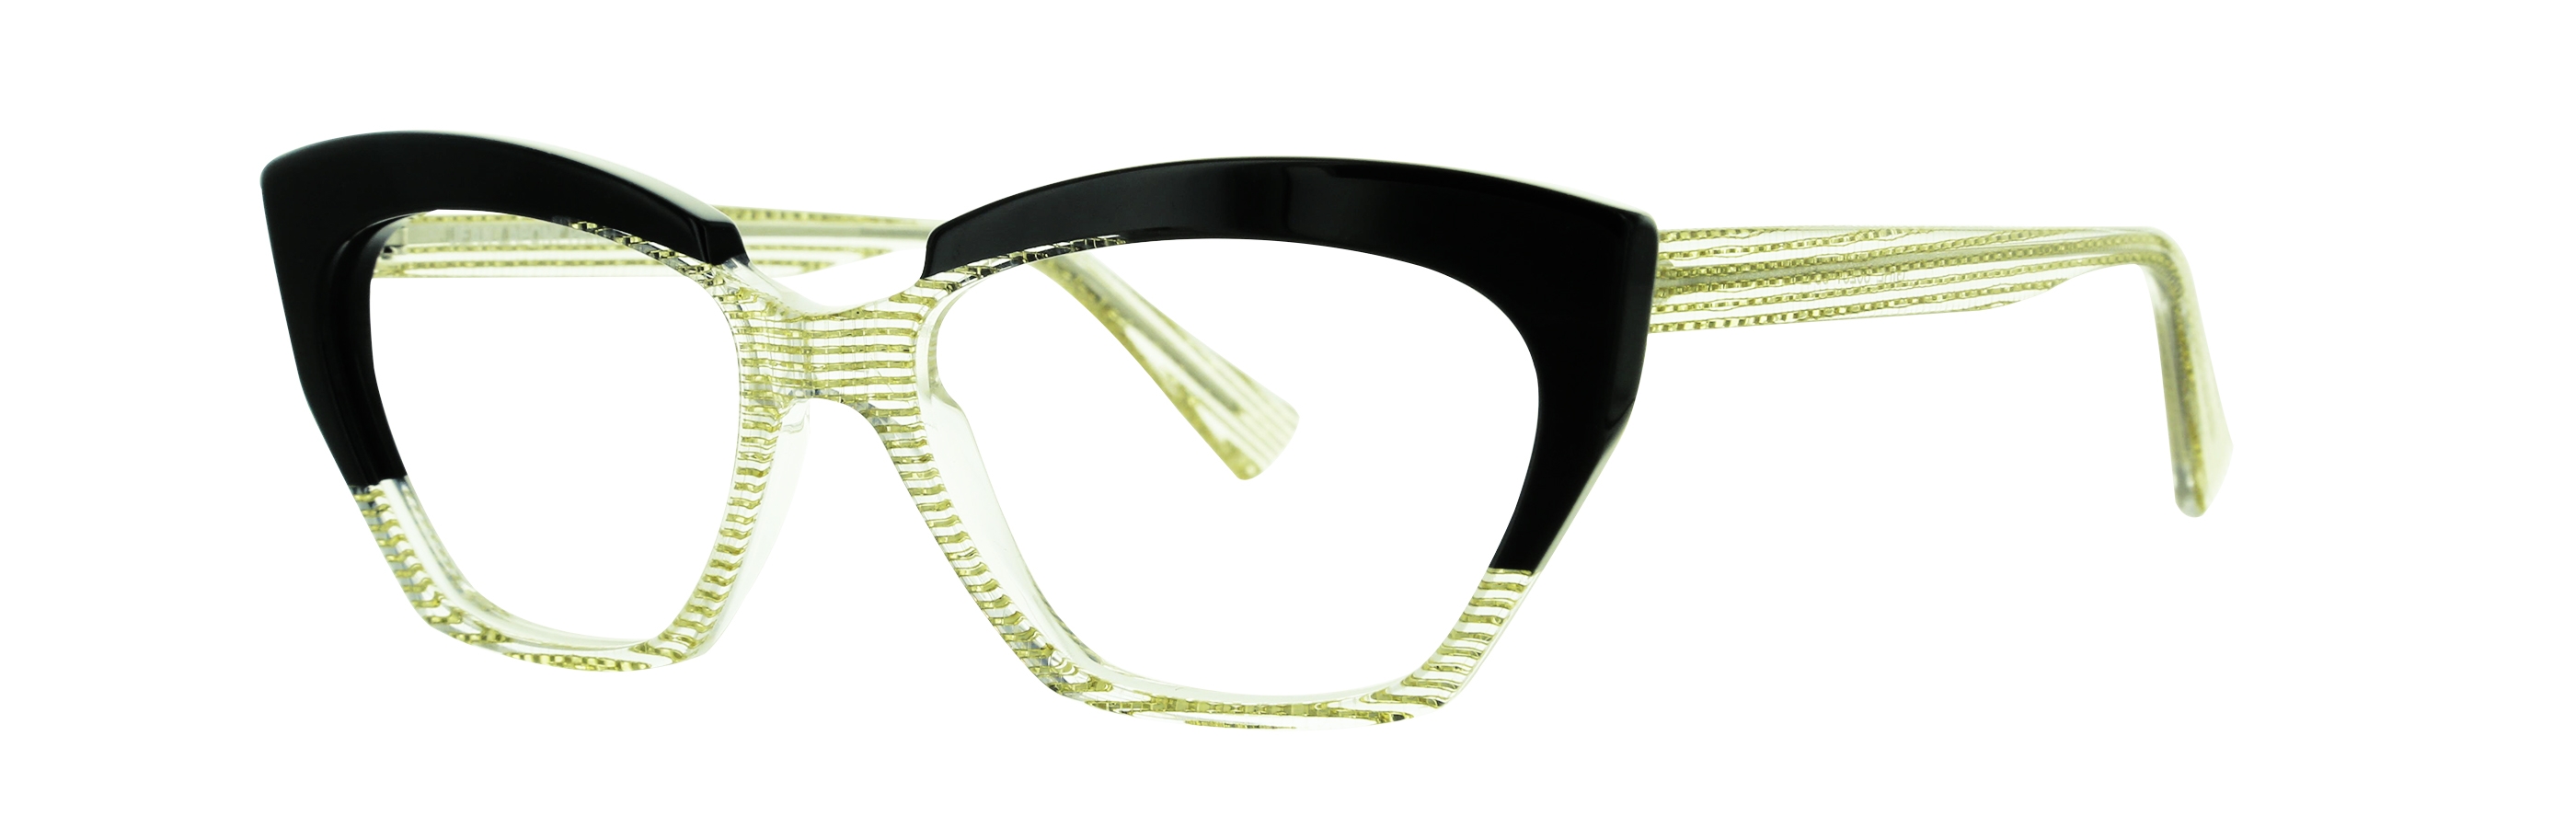 LAFONT GIRL 8025T